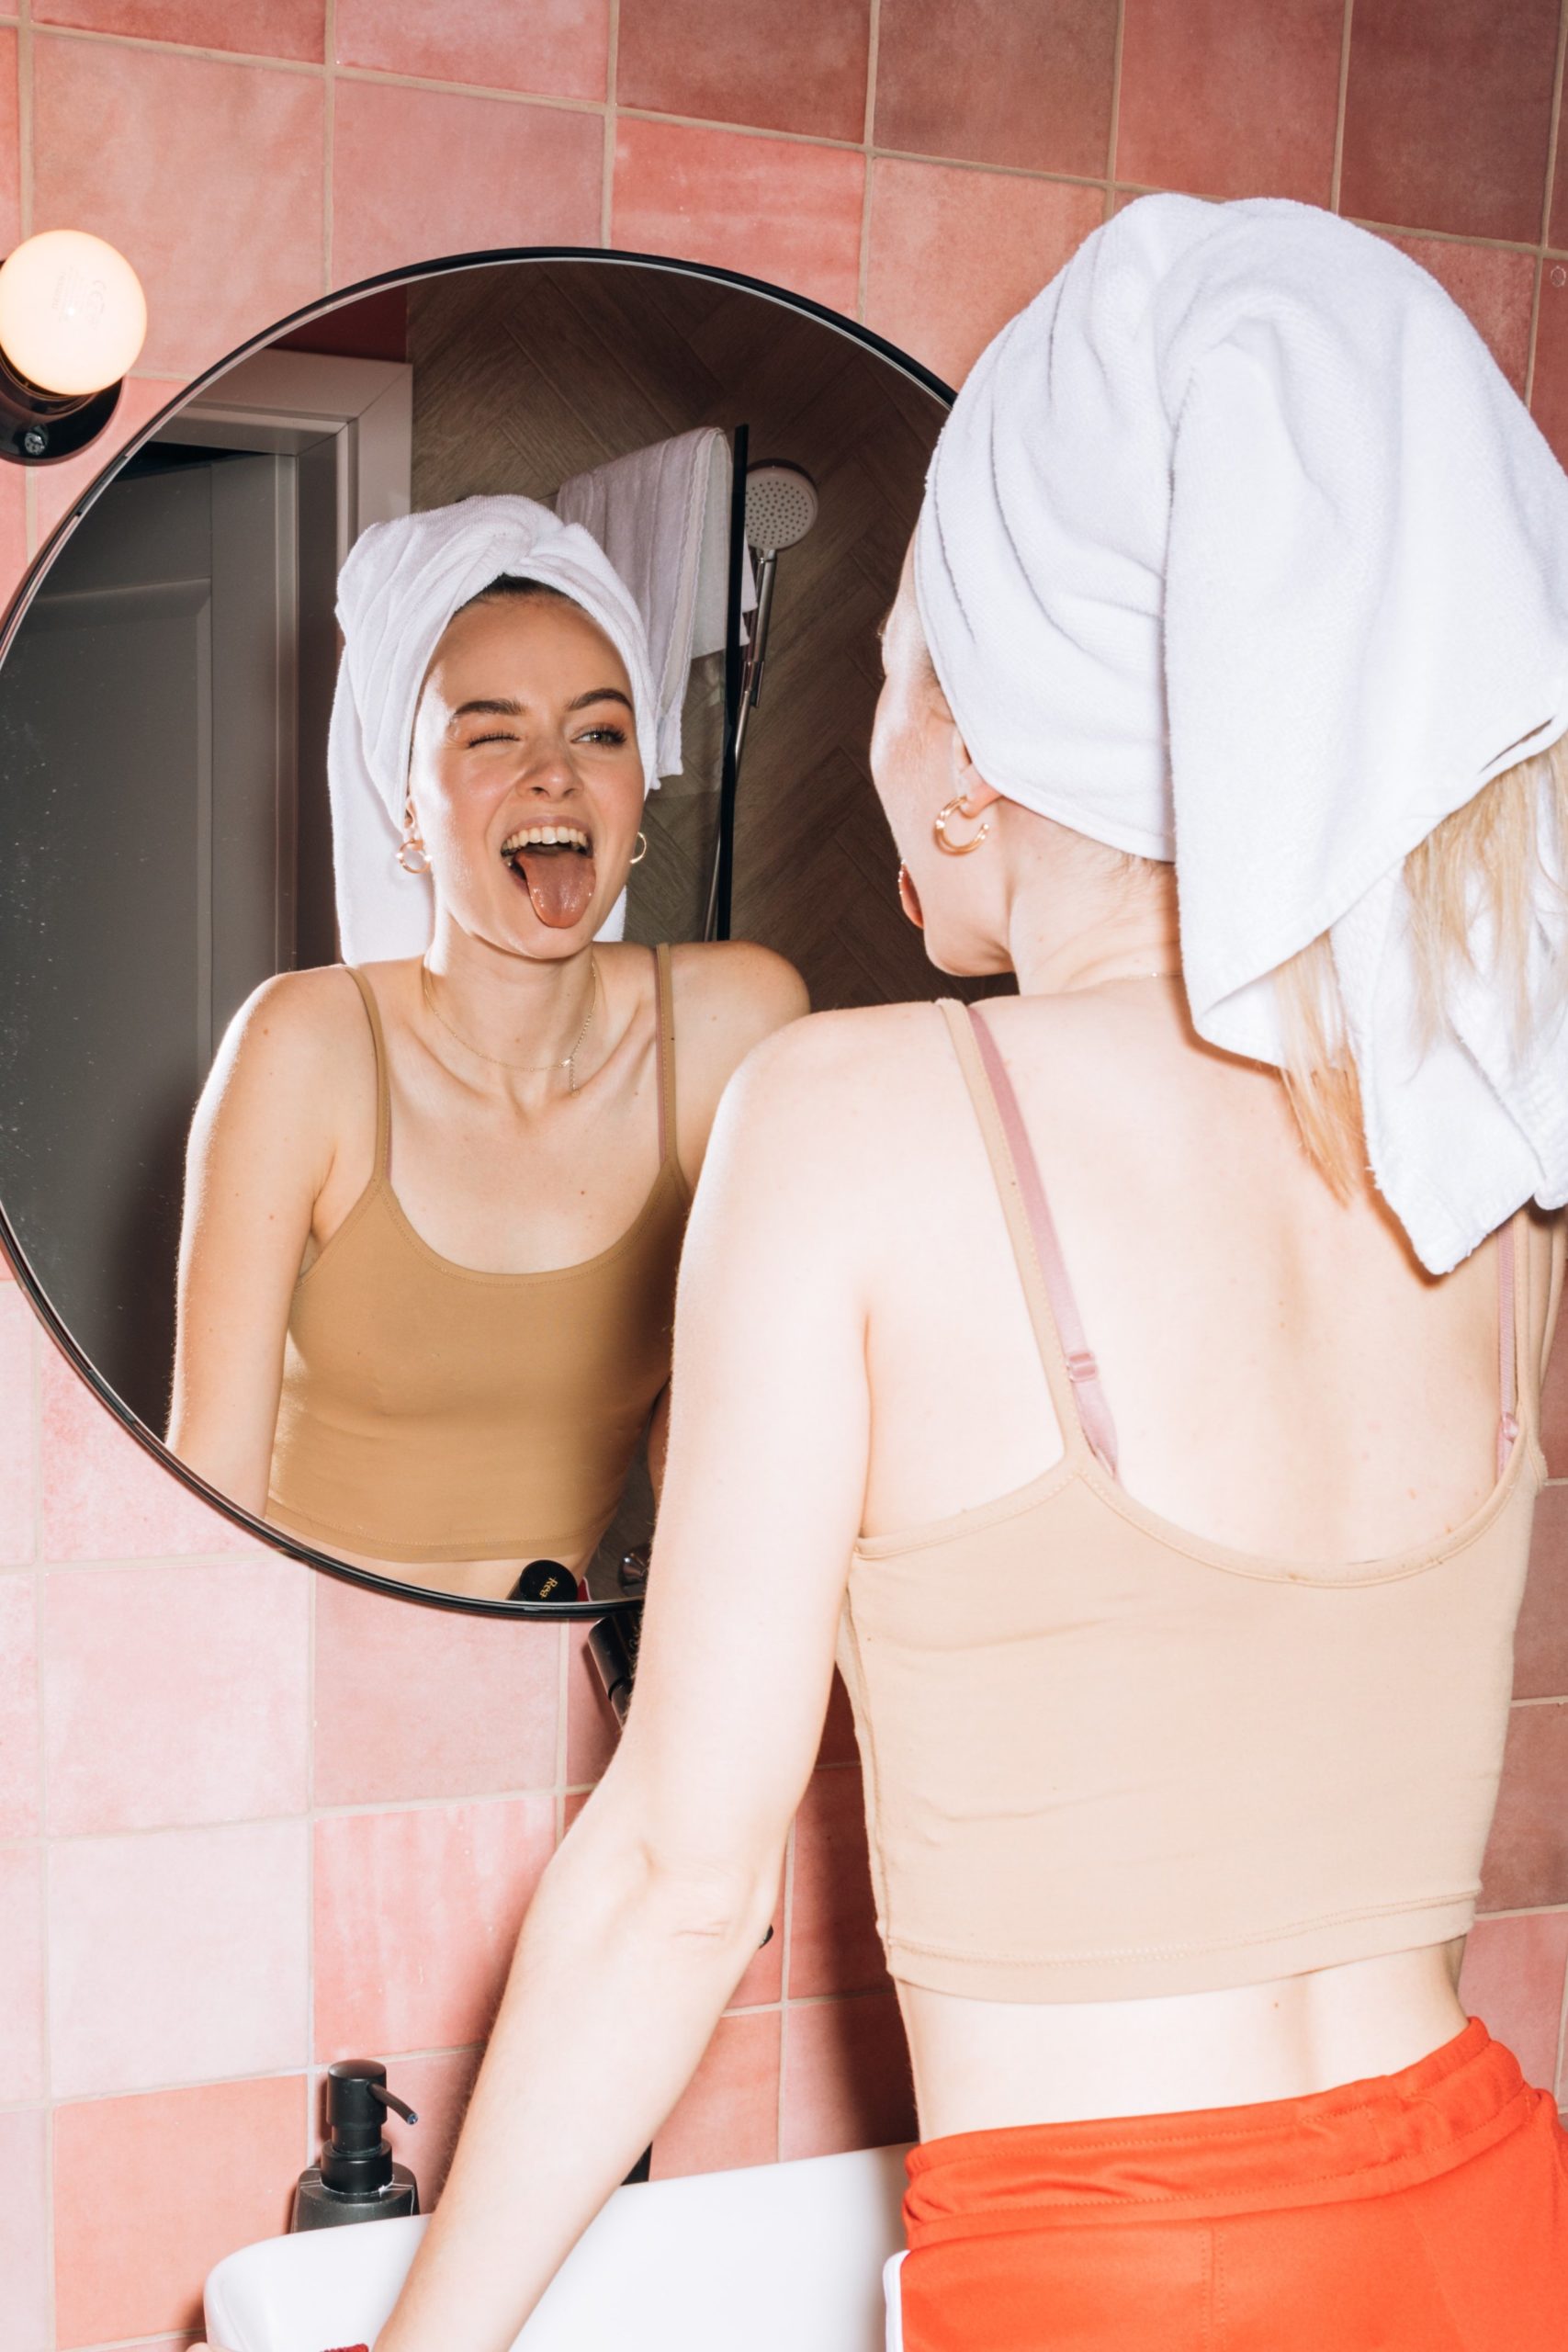 a woman with a towel on her head looks into a mirror winking and sticking her tongue out